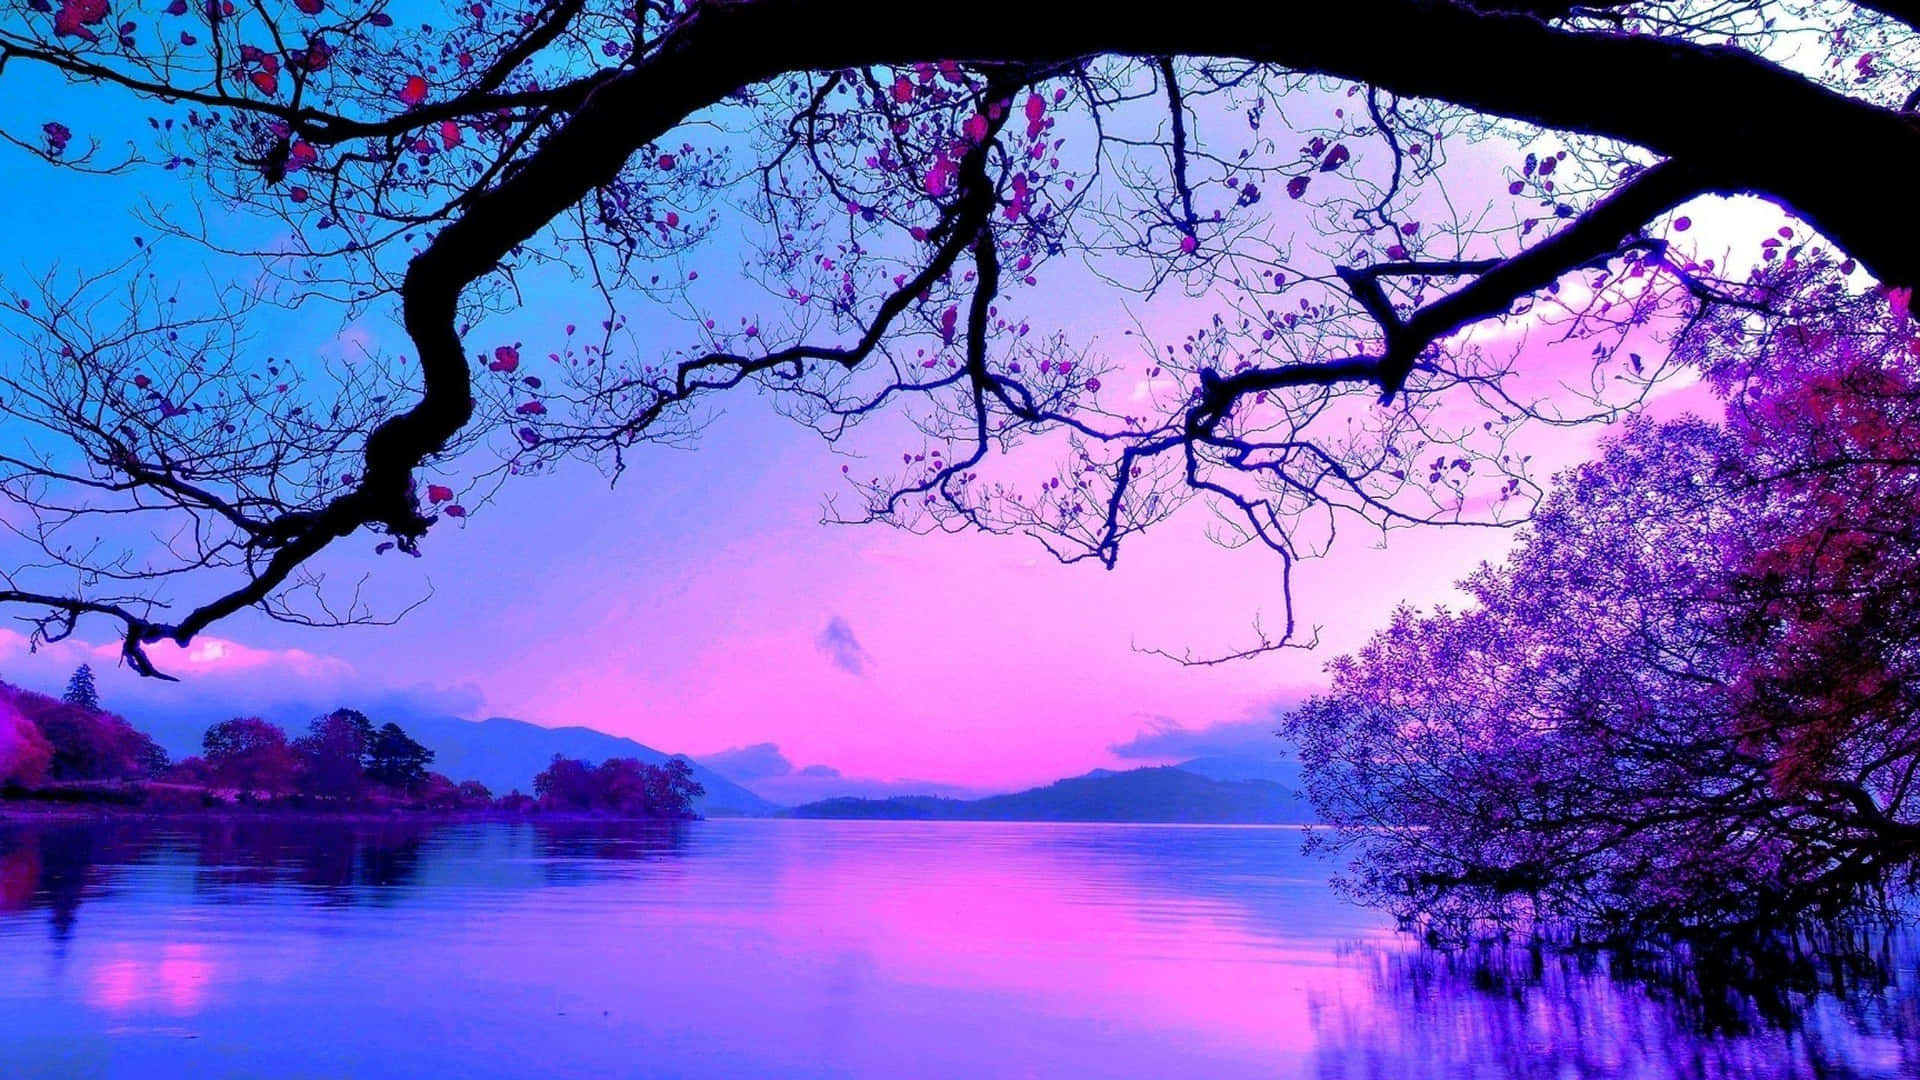 A Purple And Blue Sky With Trees And Water